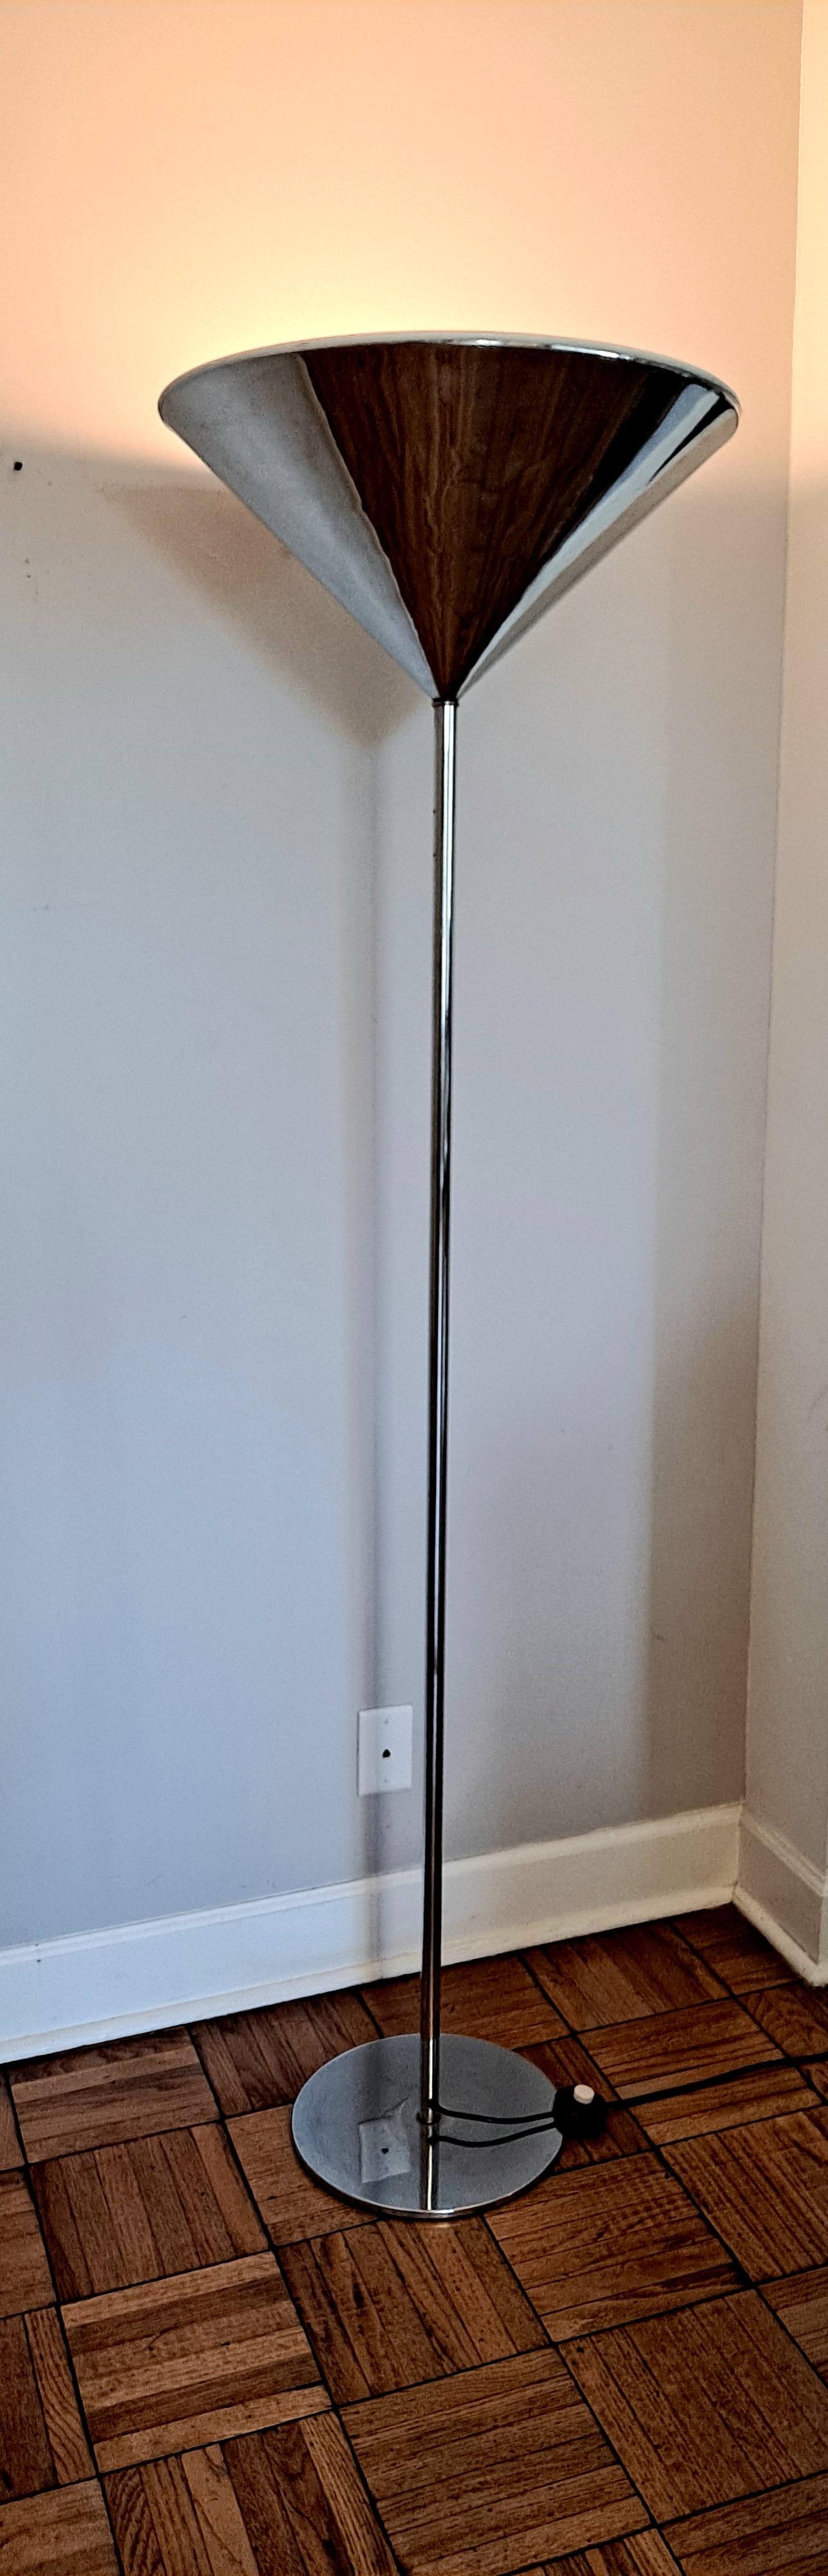  Italian Mid-century modern floor lamp .Lamp is in original condition and it is a large lamp .Torchiere lamp with a wide shade and single bulb.